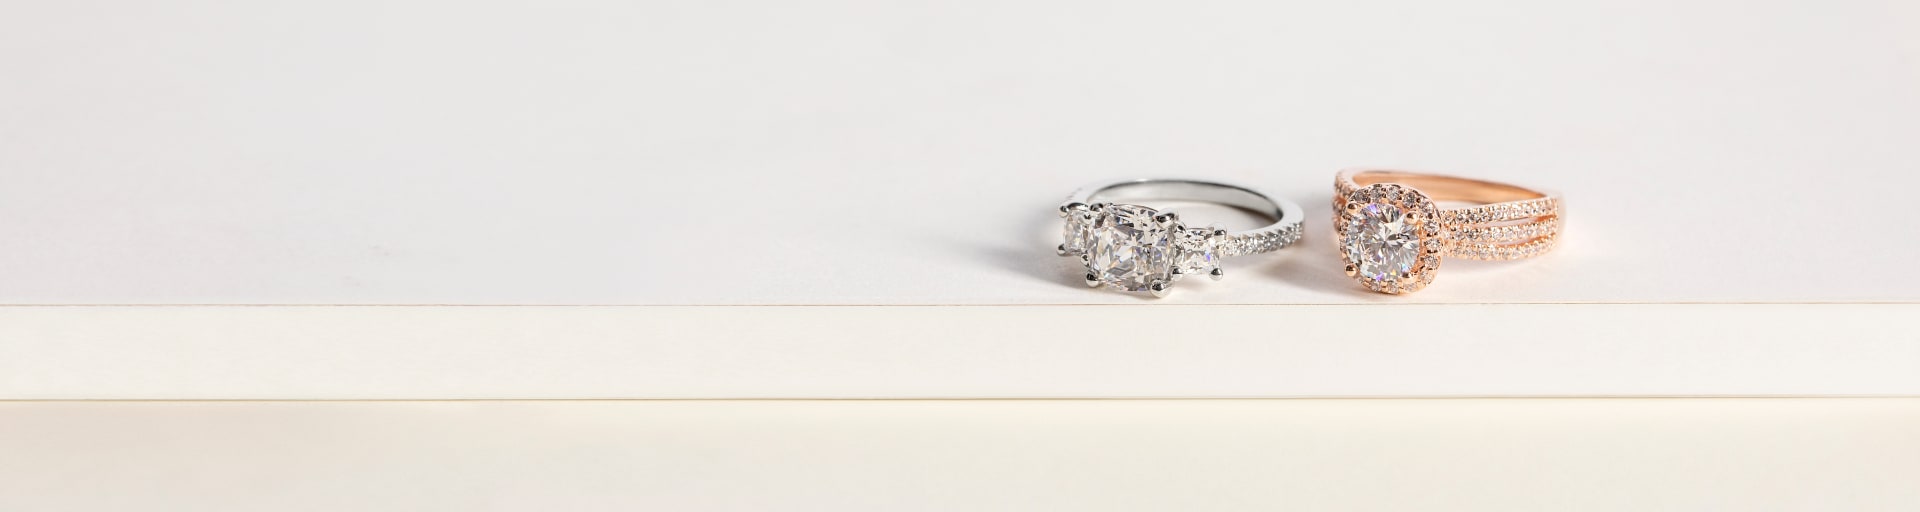 Best Place to Buy Engagement Rings: Online or In Store?